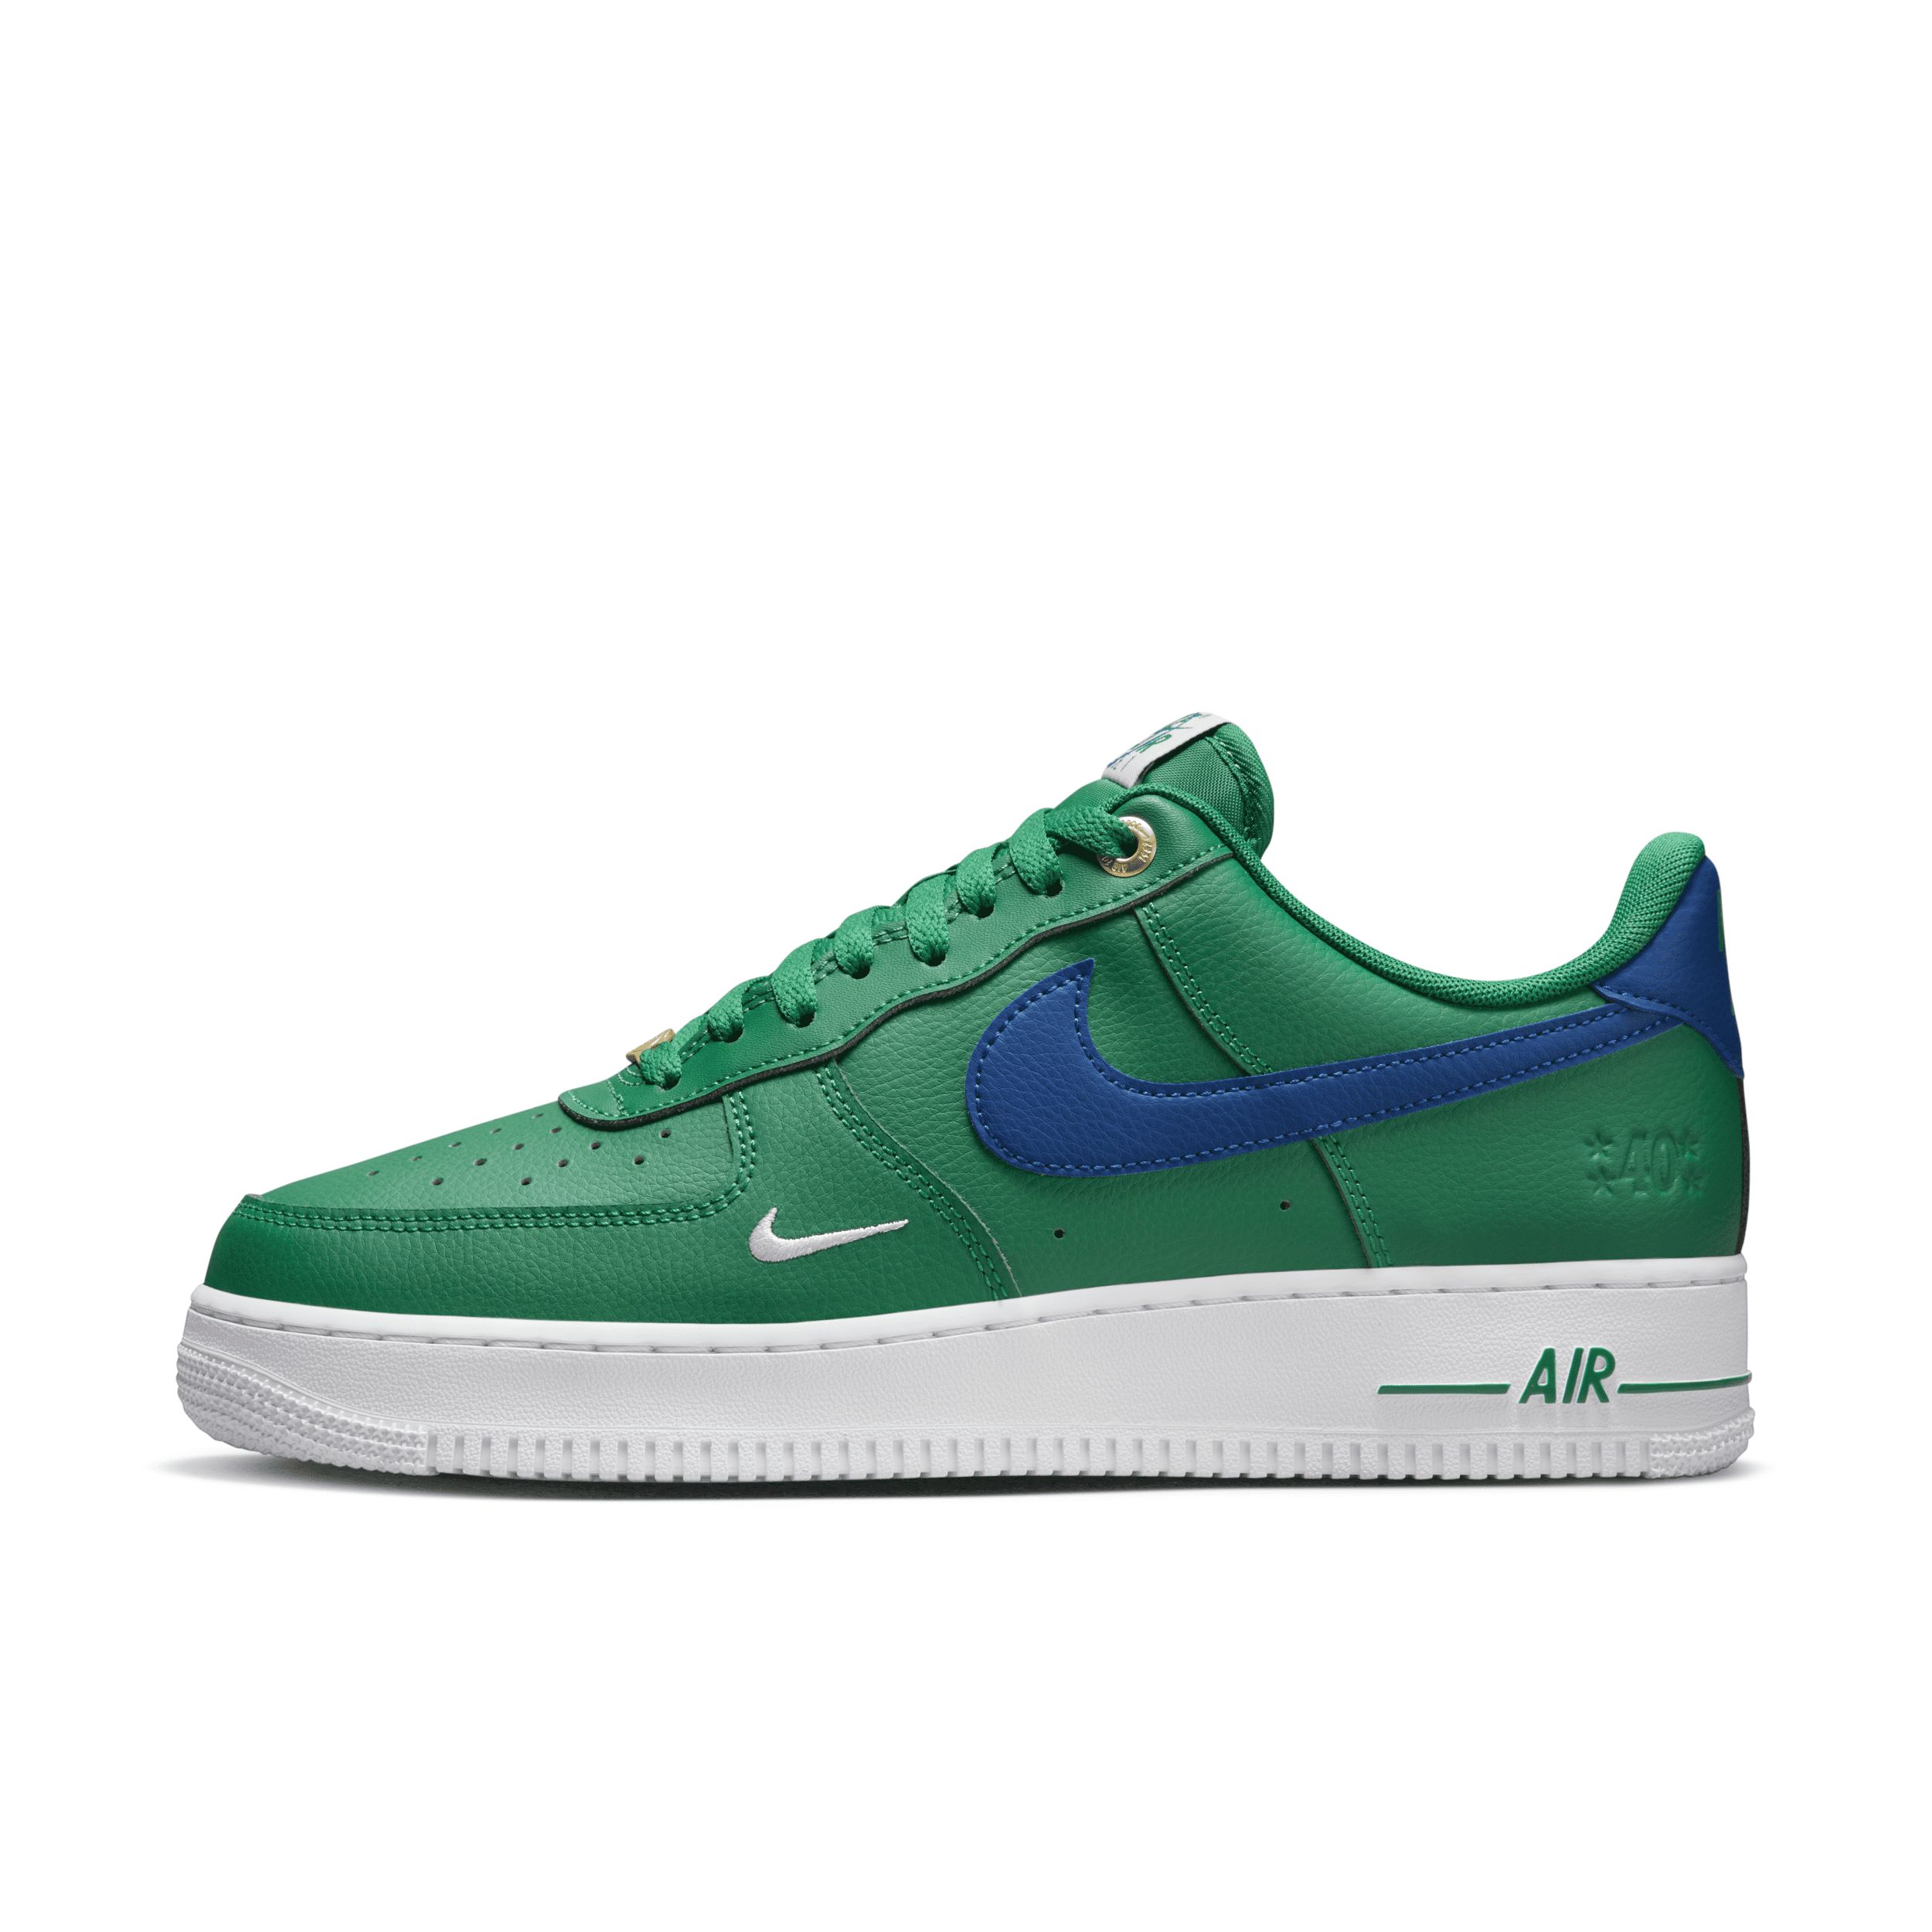 Nike Men's Air Force 1 '07 LV8 Shoes in Green, Size: 6.5 | DQ7658-300 | Nike (US)